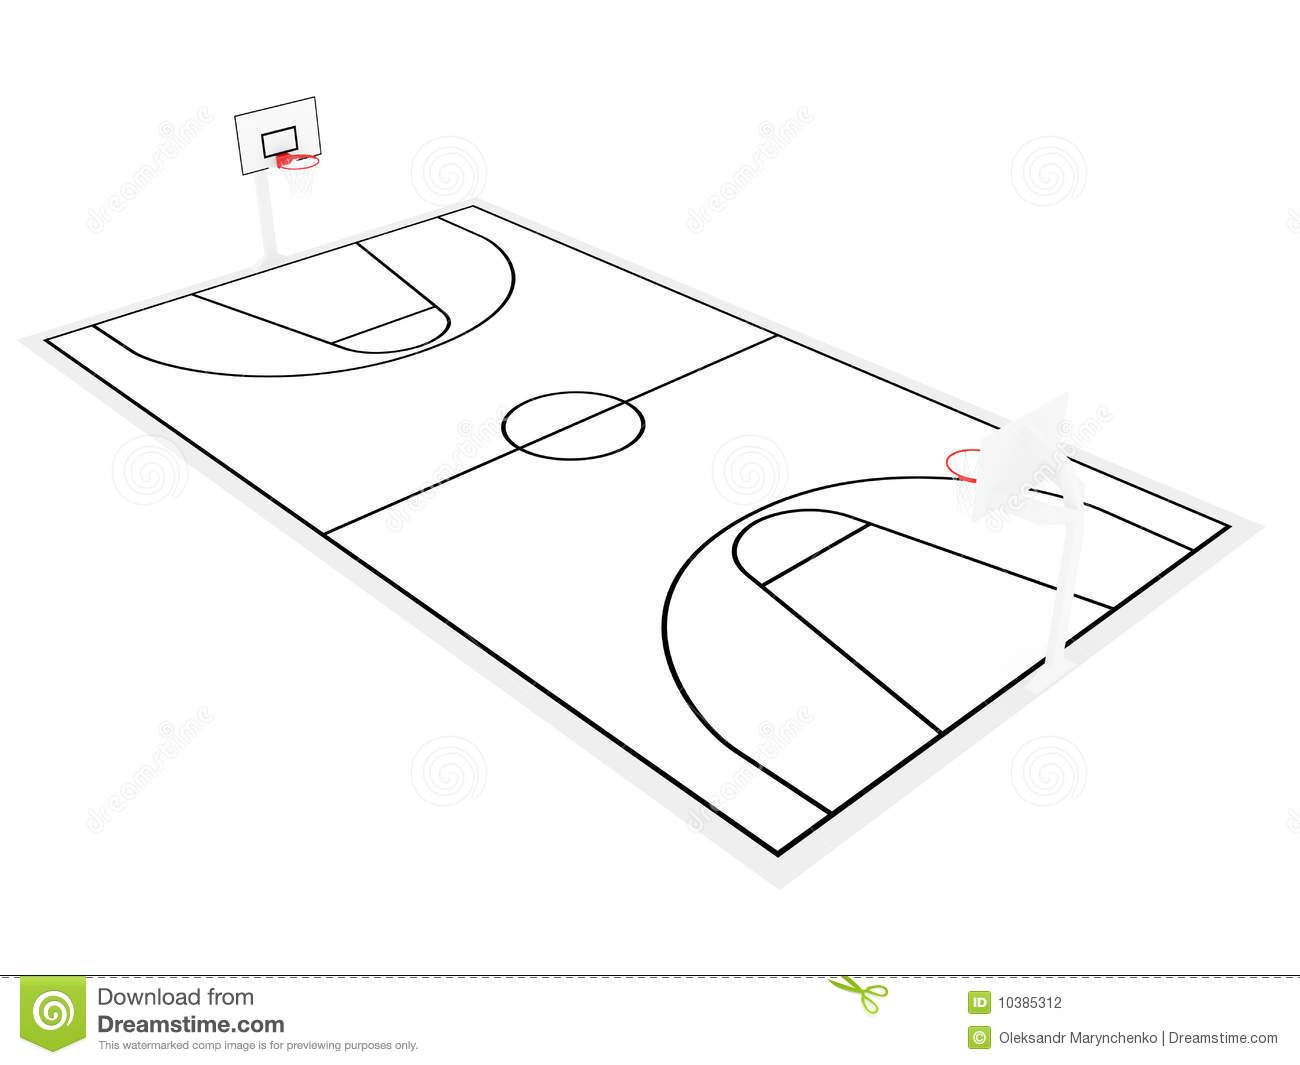 Basketball Court Sketch at PaintingValley.com | Explore ...